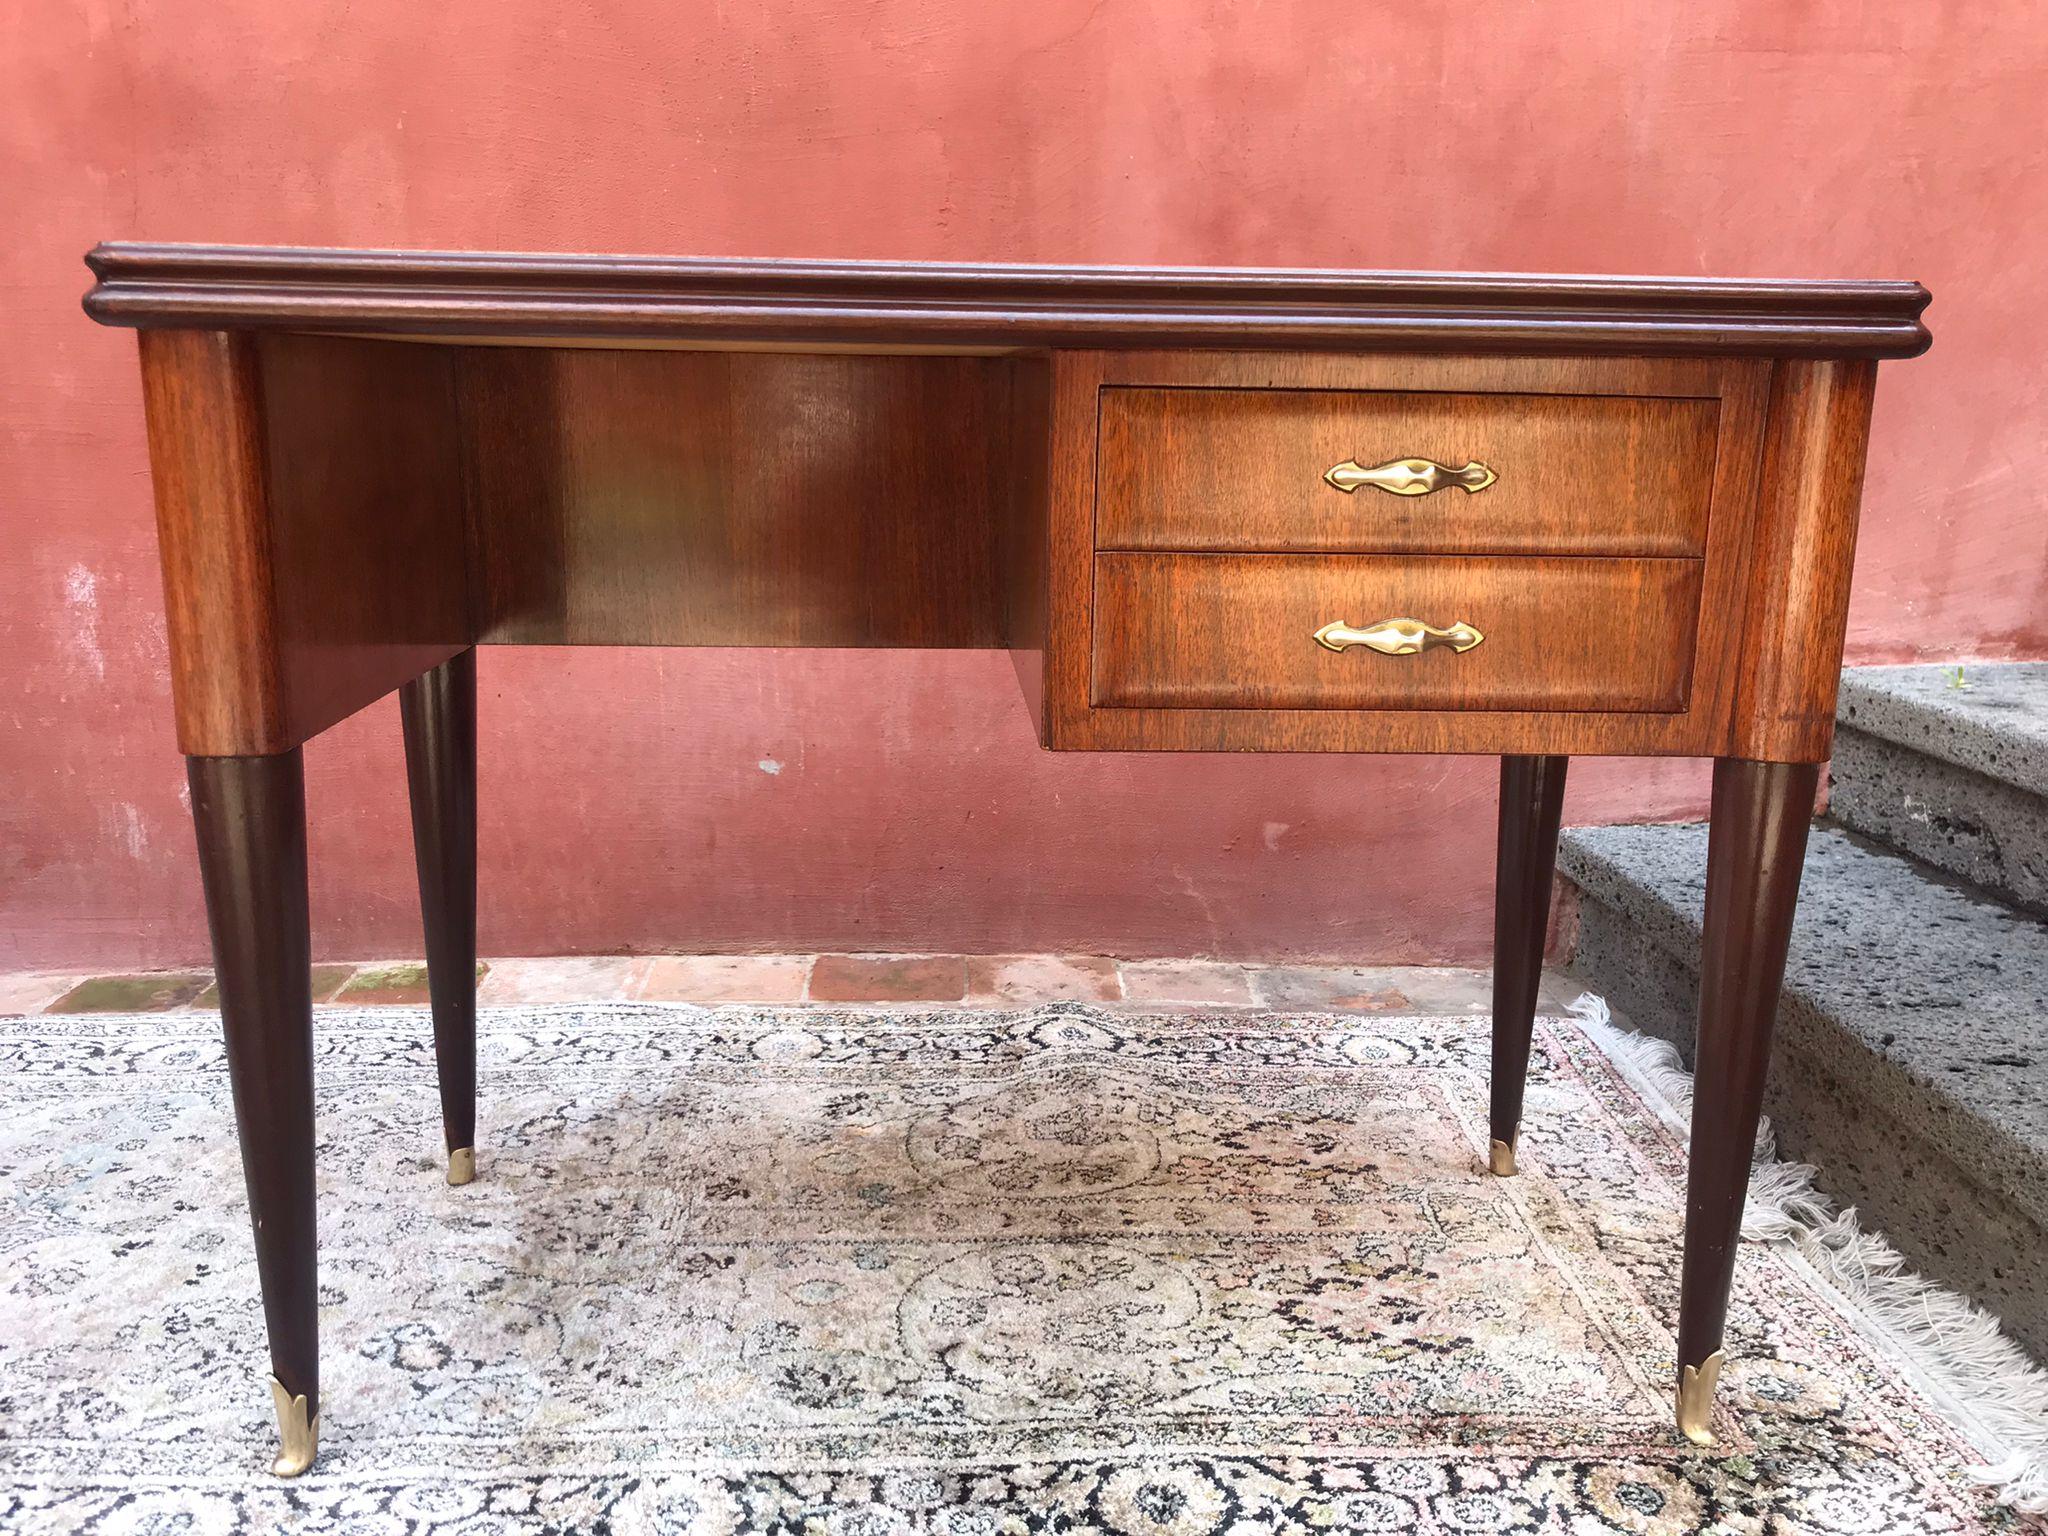 An Italian designed small writing desk in walnut,. Fantastic proportions on sculptural legs tapering to brass final on the feet. Two drawers with brass hardware with strawberry red glass top,
Attributed to Carlo De Carli, circa 1950.
In good